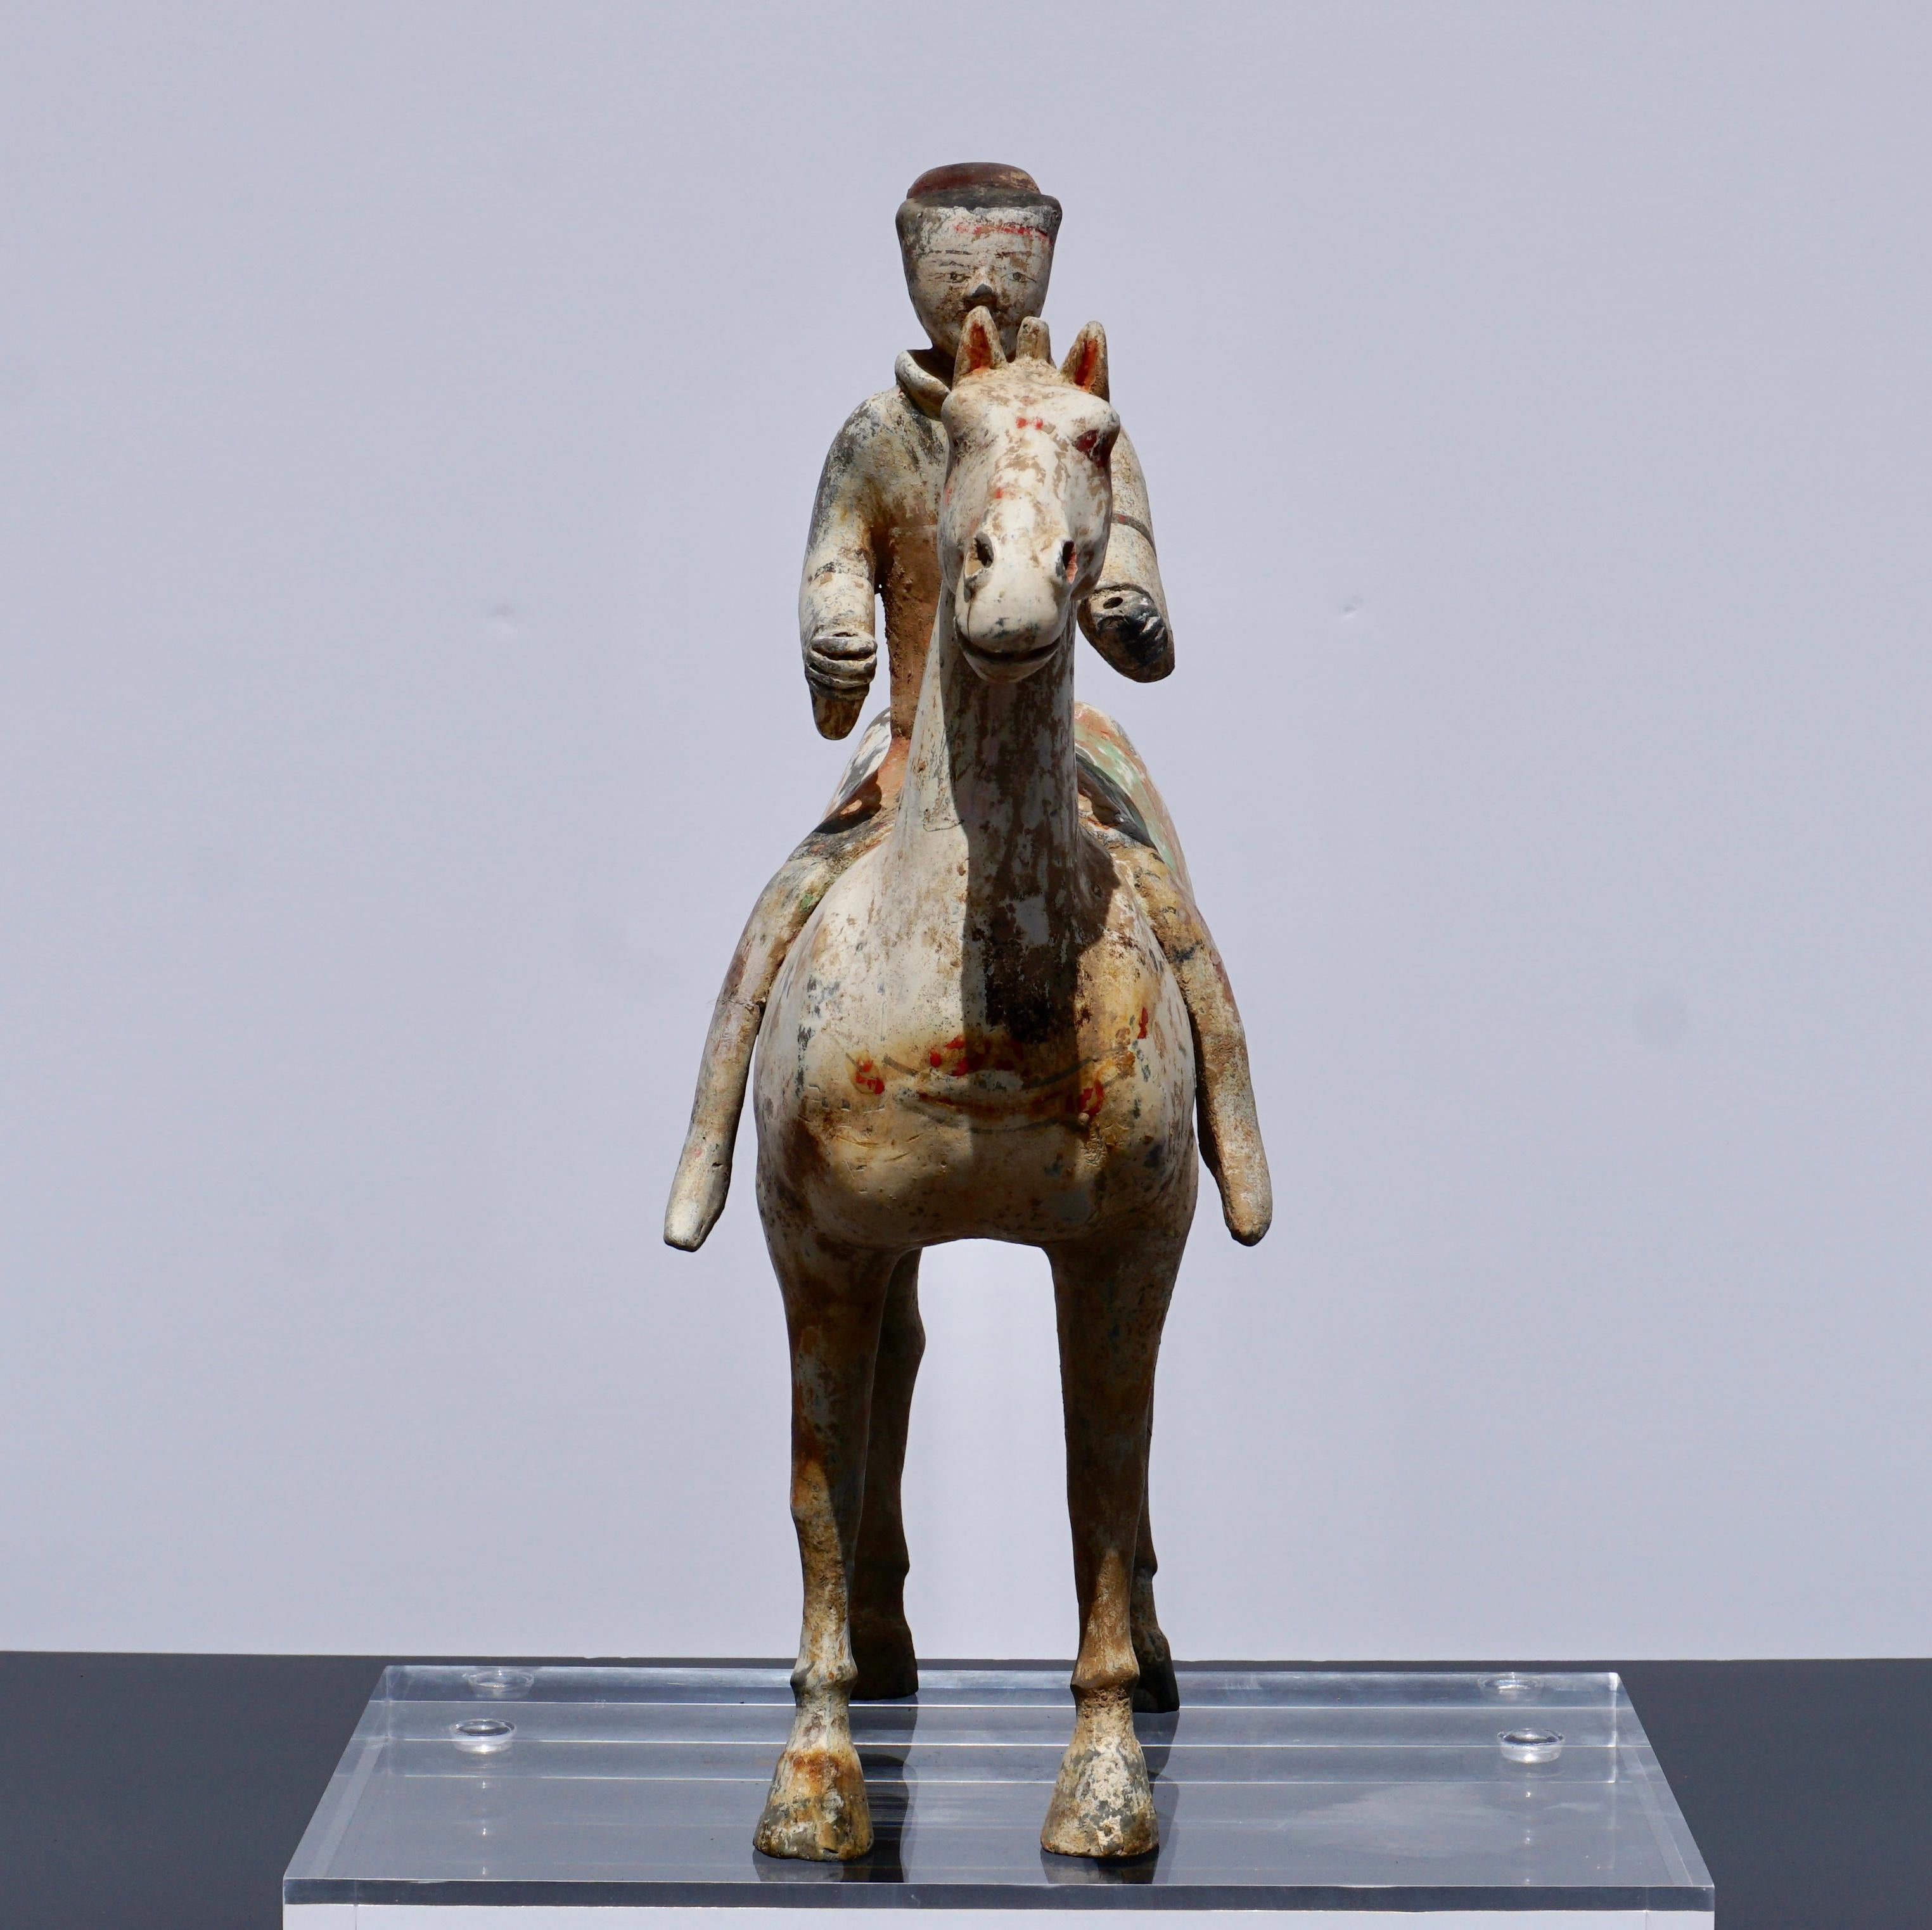 Another fine Han dynasty attributed polychrome painted terracotta horse and rider. The warrior is dressed in orange and green on a white horse. No TL test but 100% guaranteed authentic Han dynasty, A Stand will be included. We accept